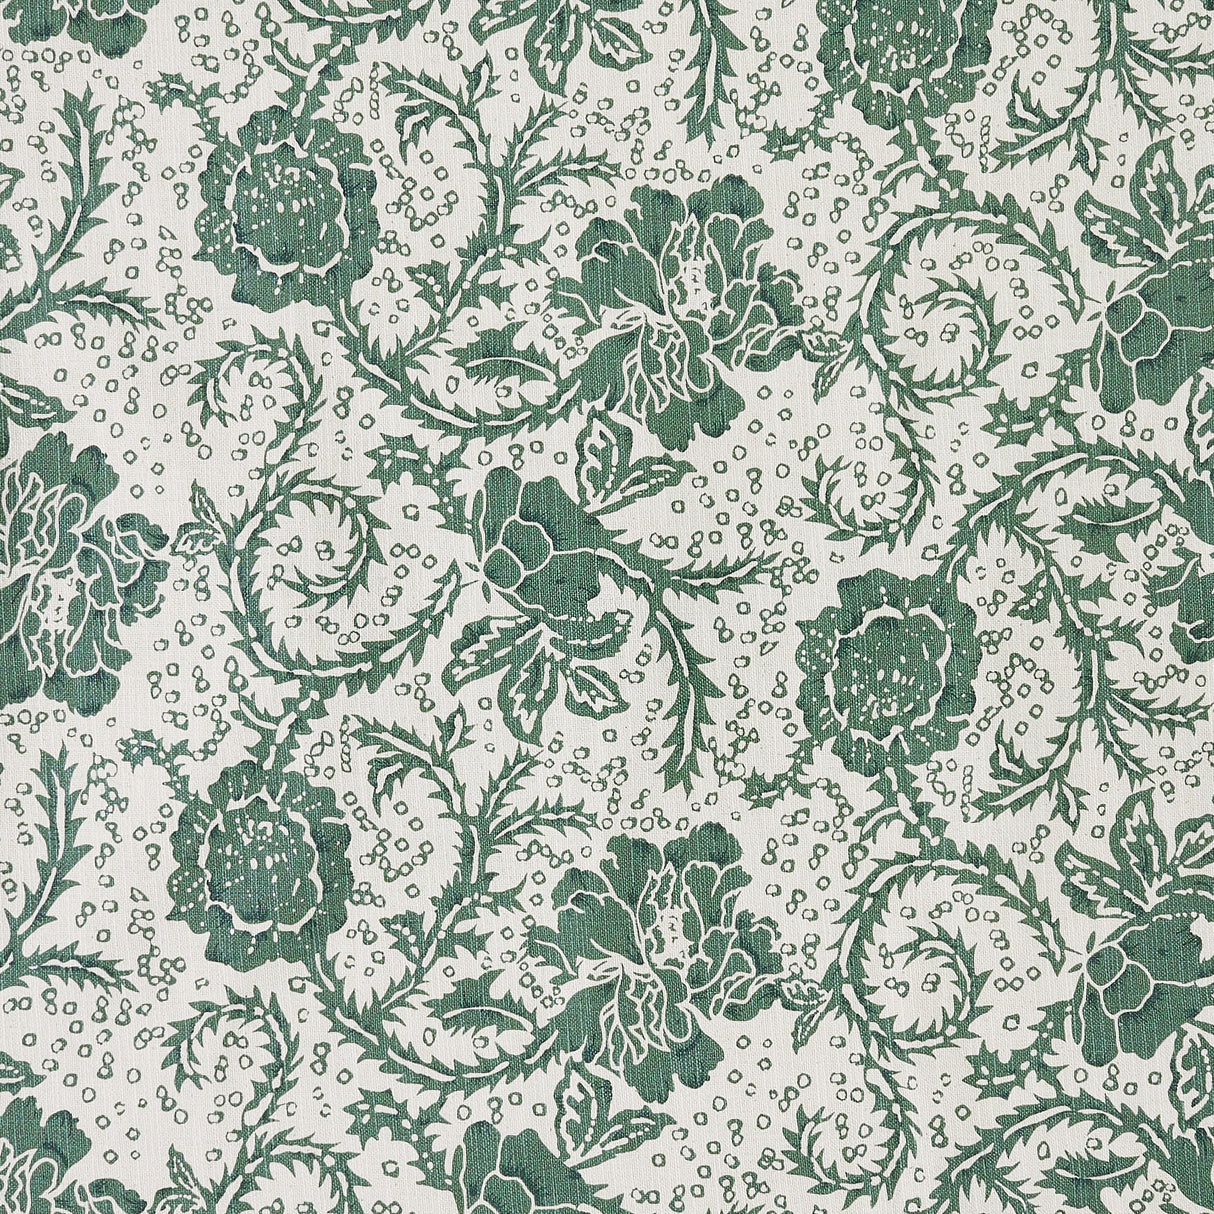 81214-Dorset-Green-Floral-King-Bed-Skirt-78x80x16-image-4